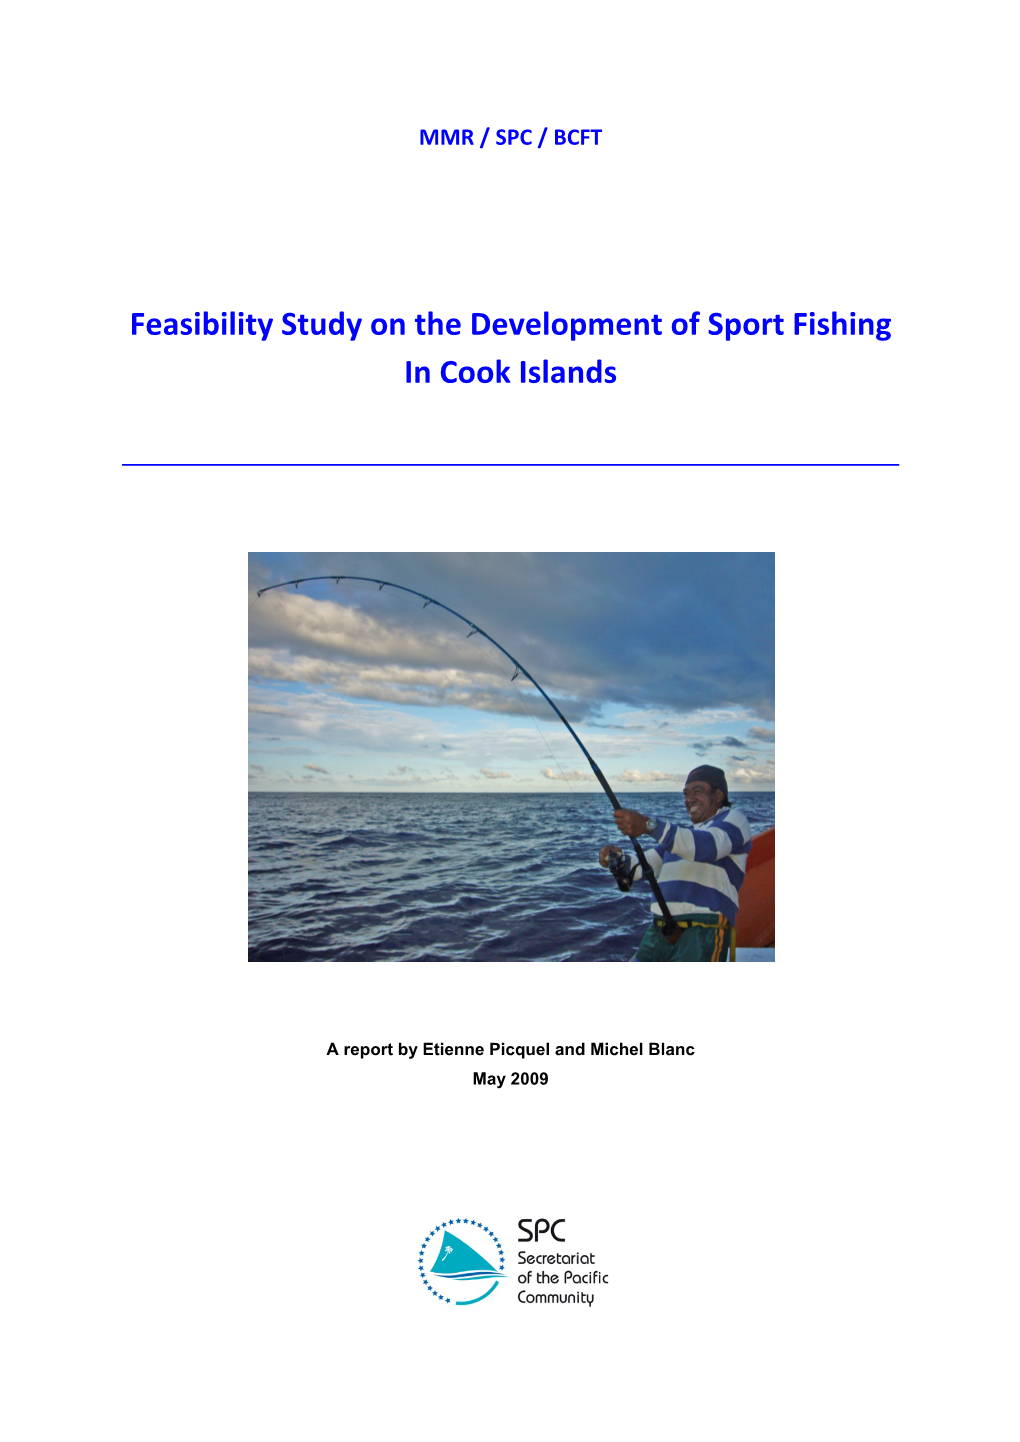 Feasibility Study on the Development of Sport Fishing in Cook Islands